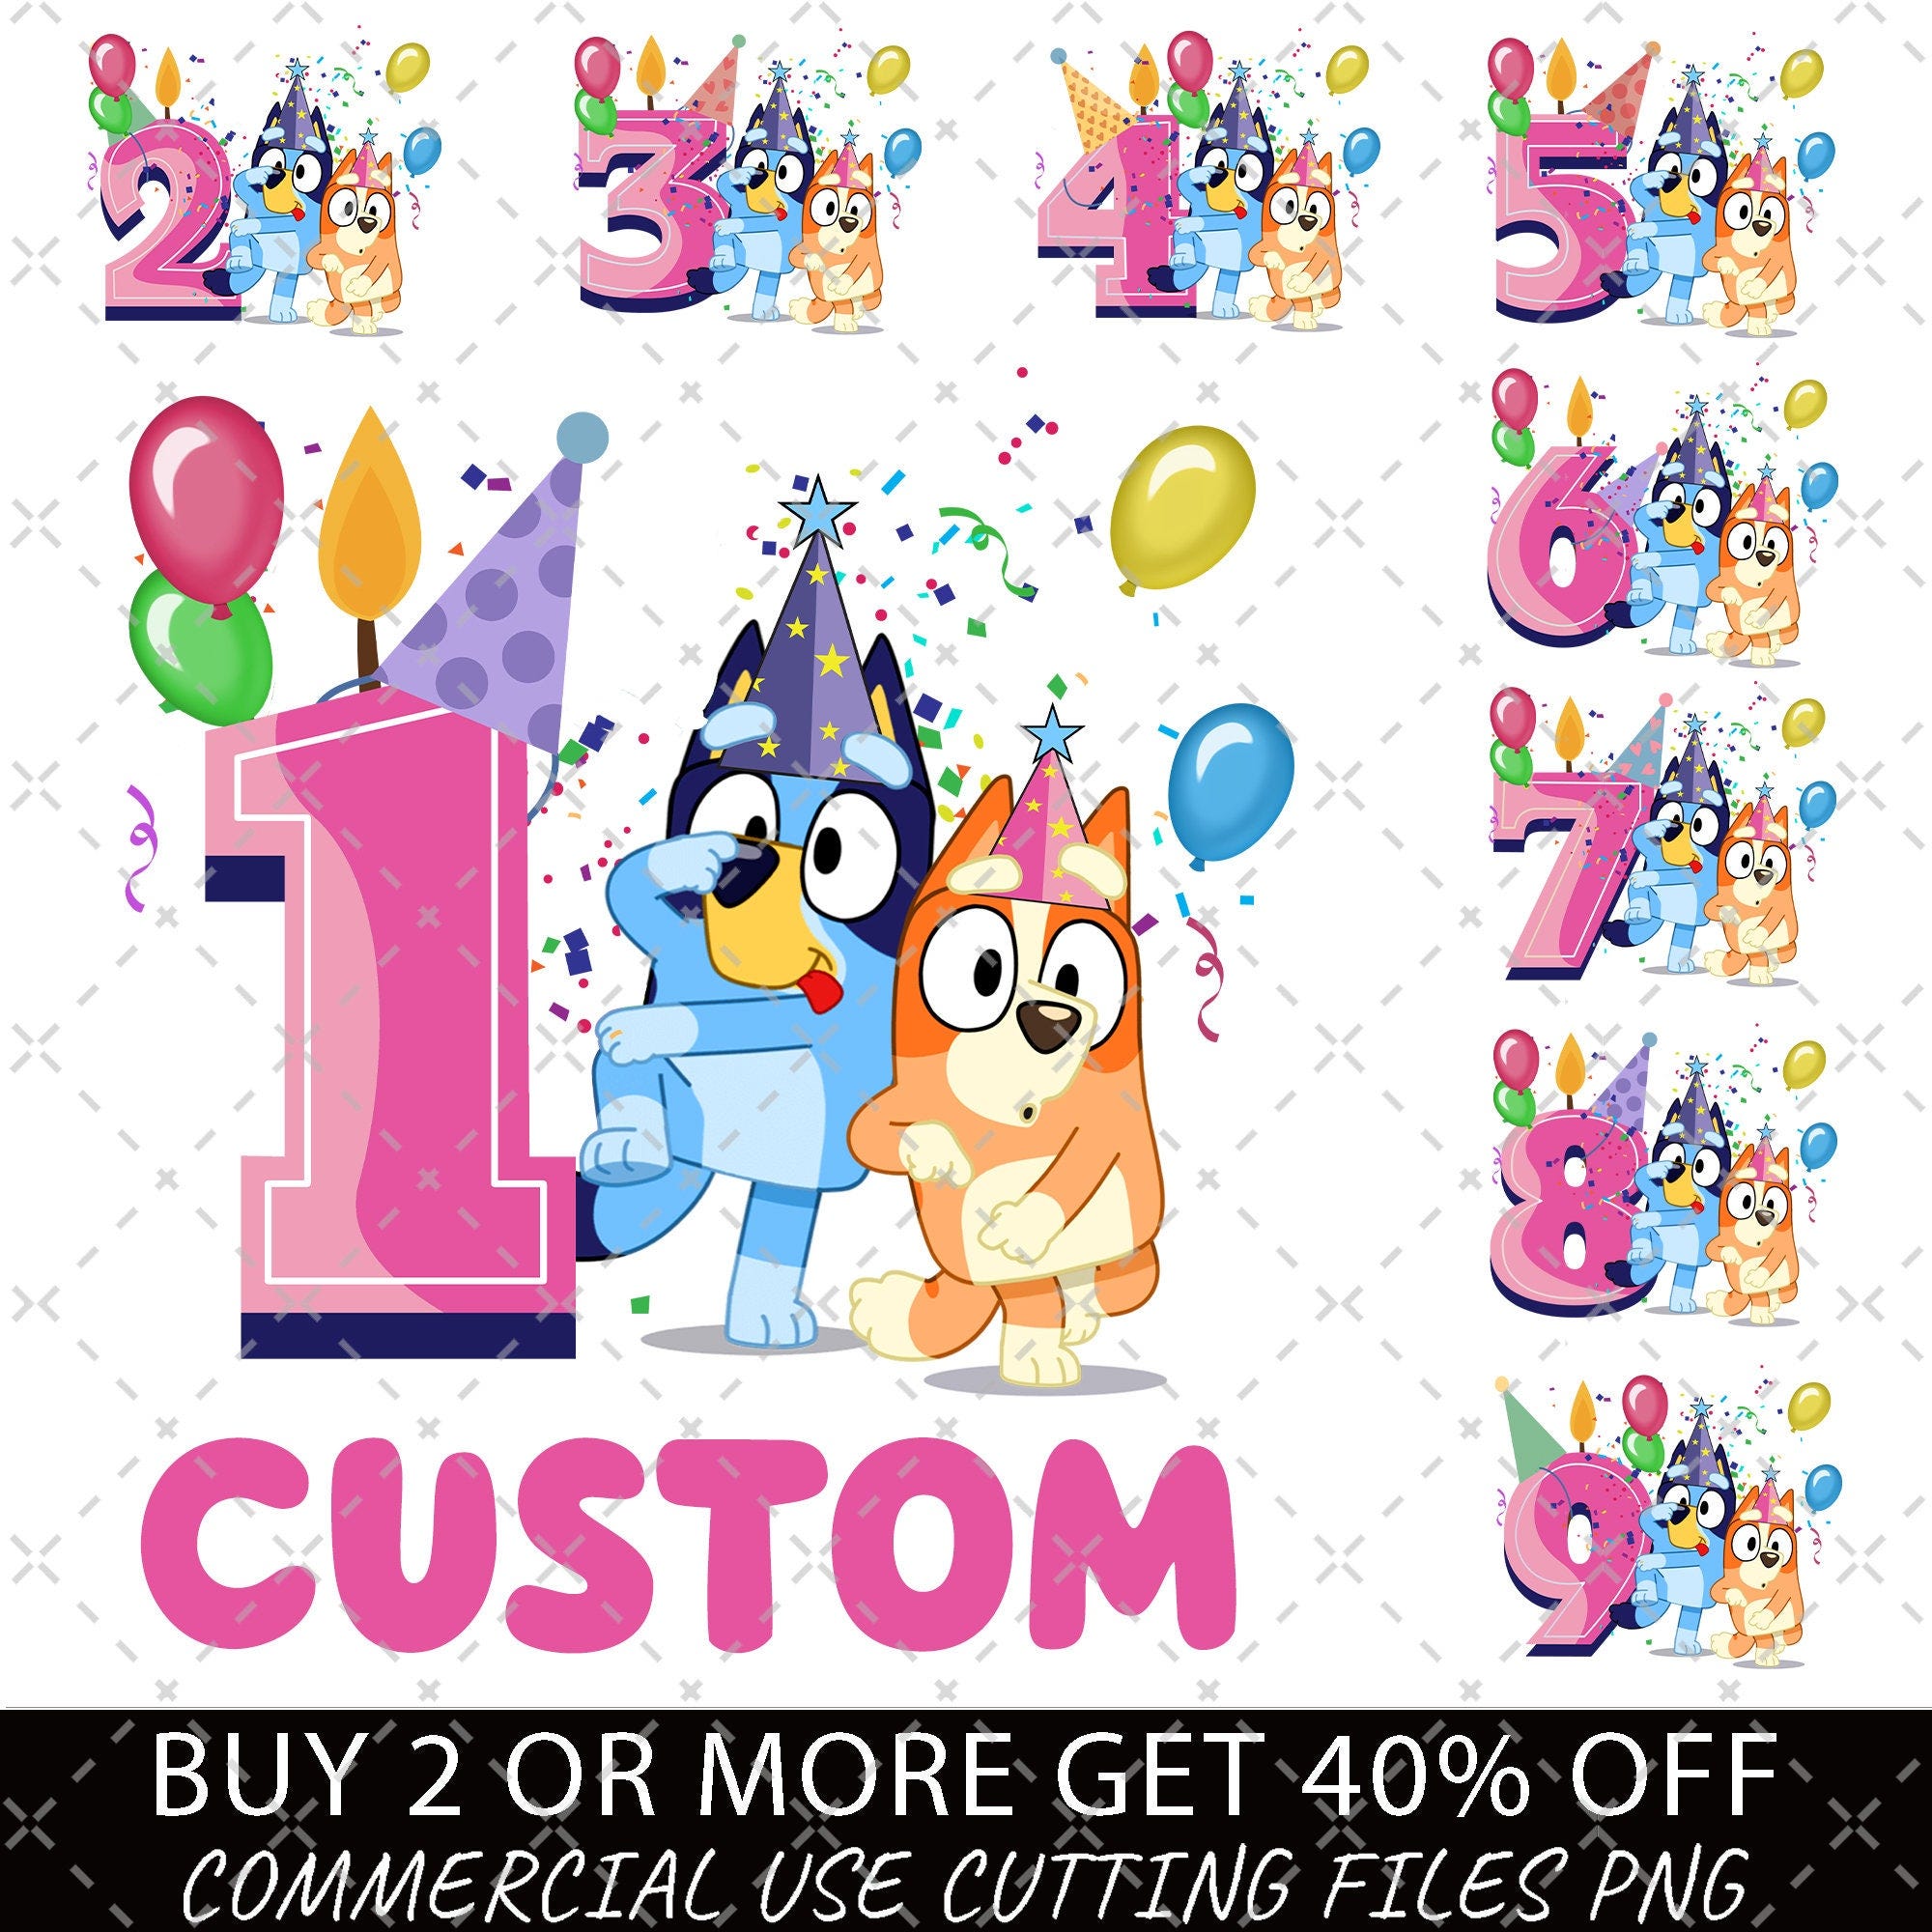 Custom Bluey Birthday Png, My Birthday Png, Birthday Party, Birthday Gifts, Happy Birthday Png, Birthday Family Matching Png, Bluey Number